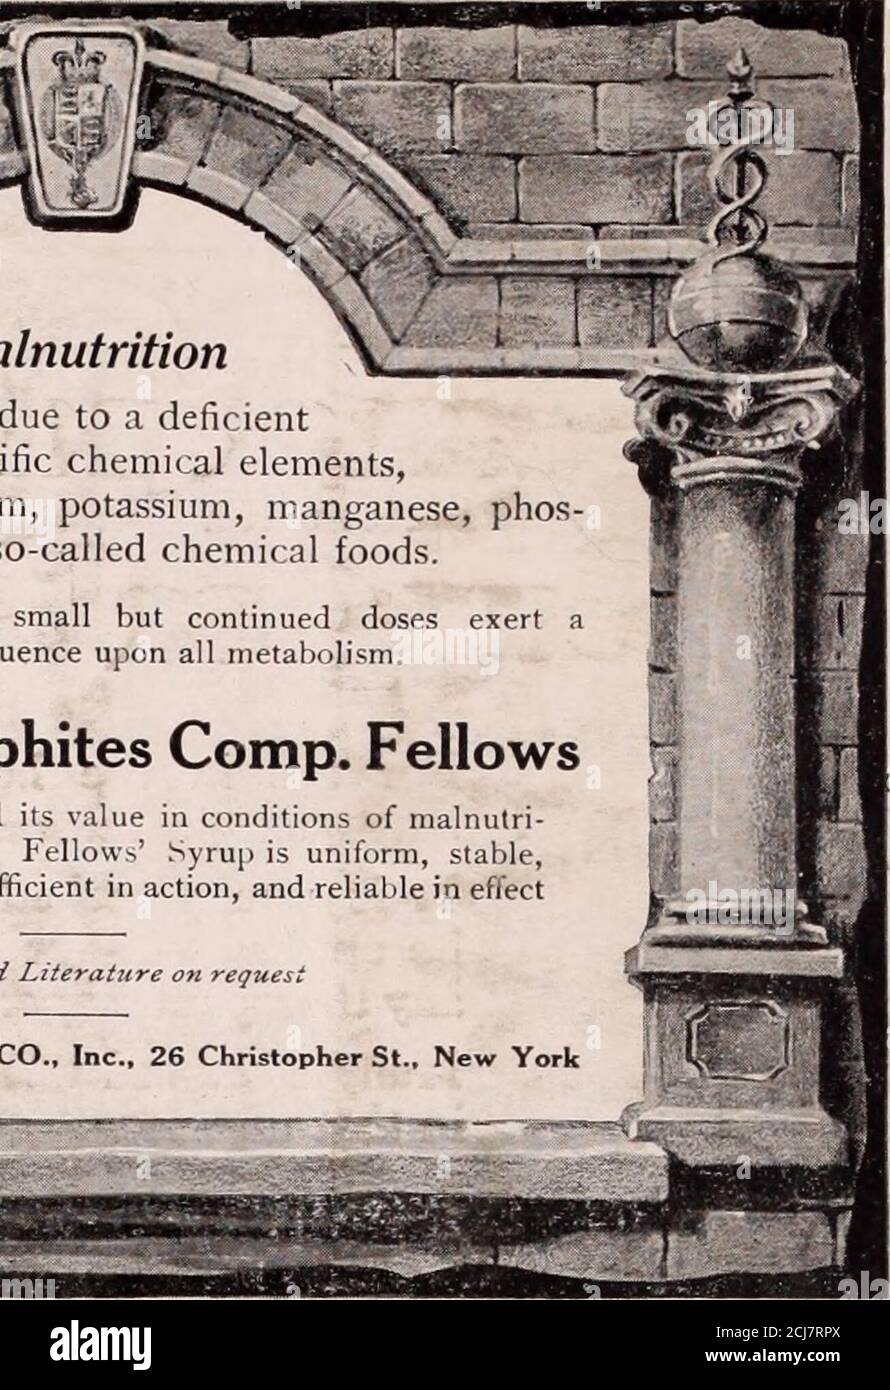 . Alienist and neurologist. . Samples and Literature o7i regues. FELLOWS MEDICAL MFG. CO., Inc., 26 Christopher St., New York. is often due to a deficientsupply of specific chemical elements,such as calcium, sodium, potassium, manganese, phos-phorus, and iron—the so-called chemical foods. Quinine and strychnine in small but continued doses exert adynamic or activating influence upon all metabolism. Syr. Hypophosphites Comp. Fellows has clinically demonstrated its value in conditions of malnutri-tion for over fifty years. Fellows Syrup is uniform, stable,bland, easily-assimilable, efficient in Stock Photo